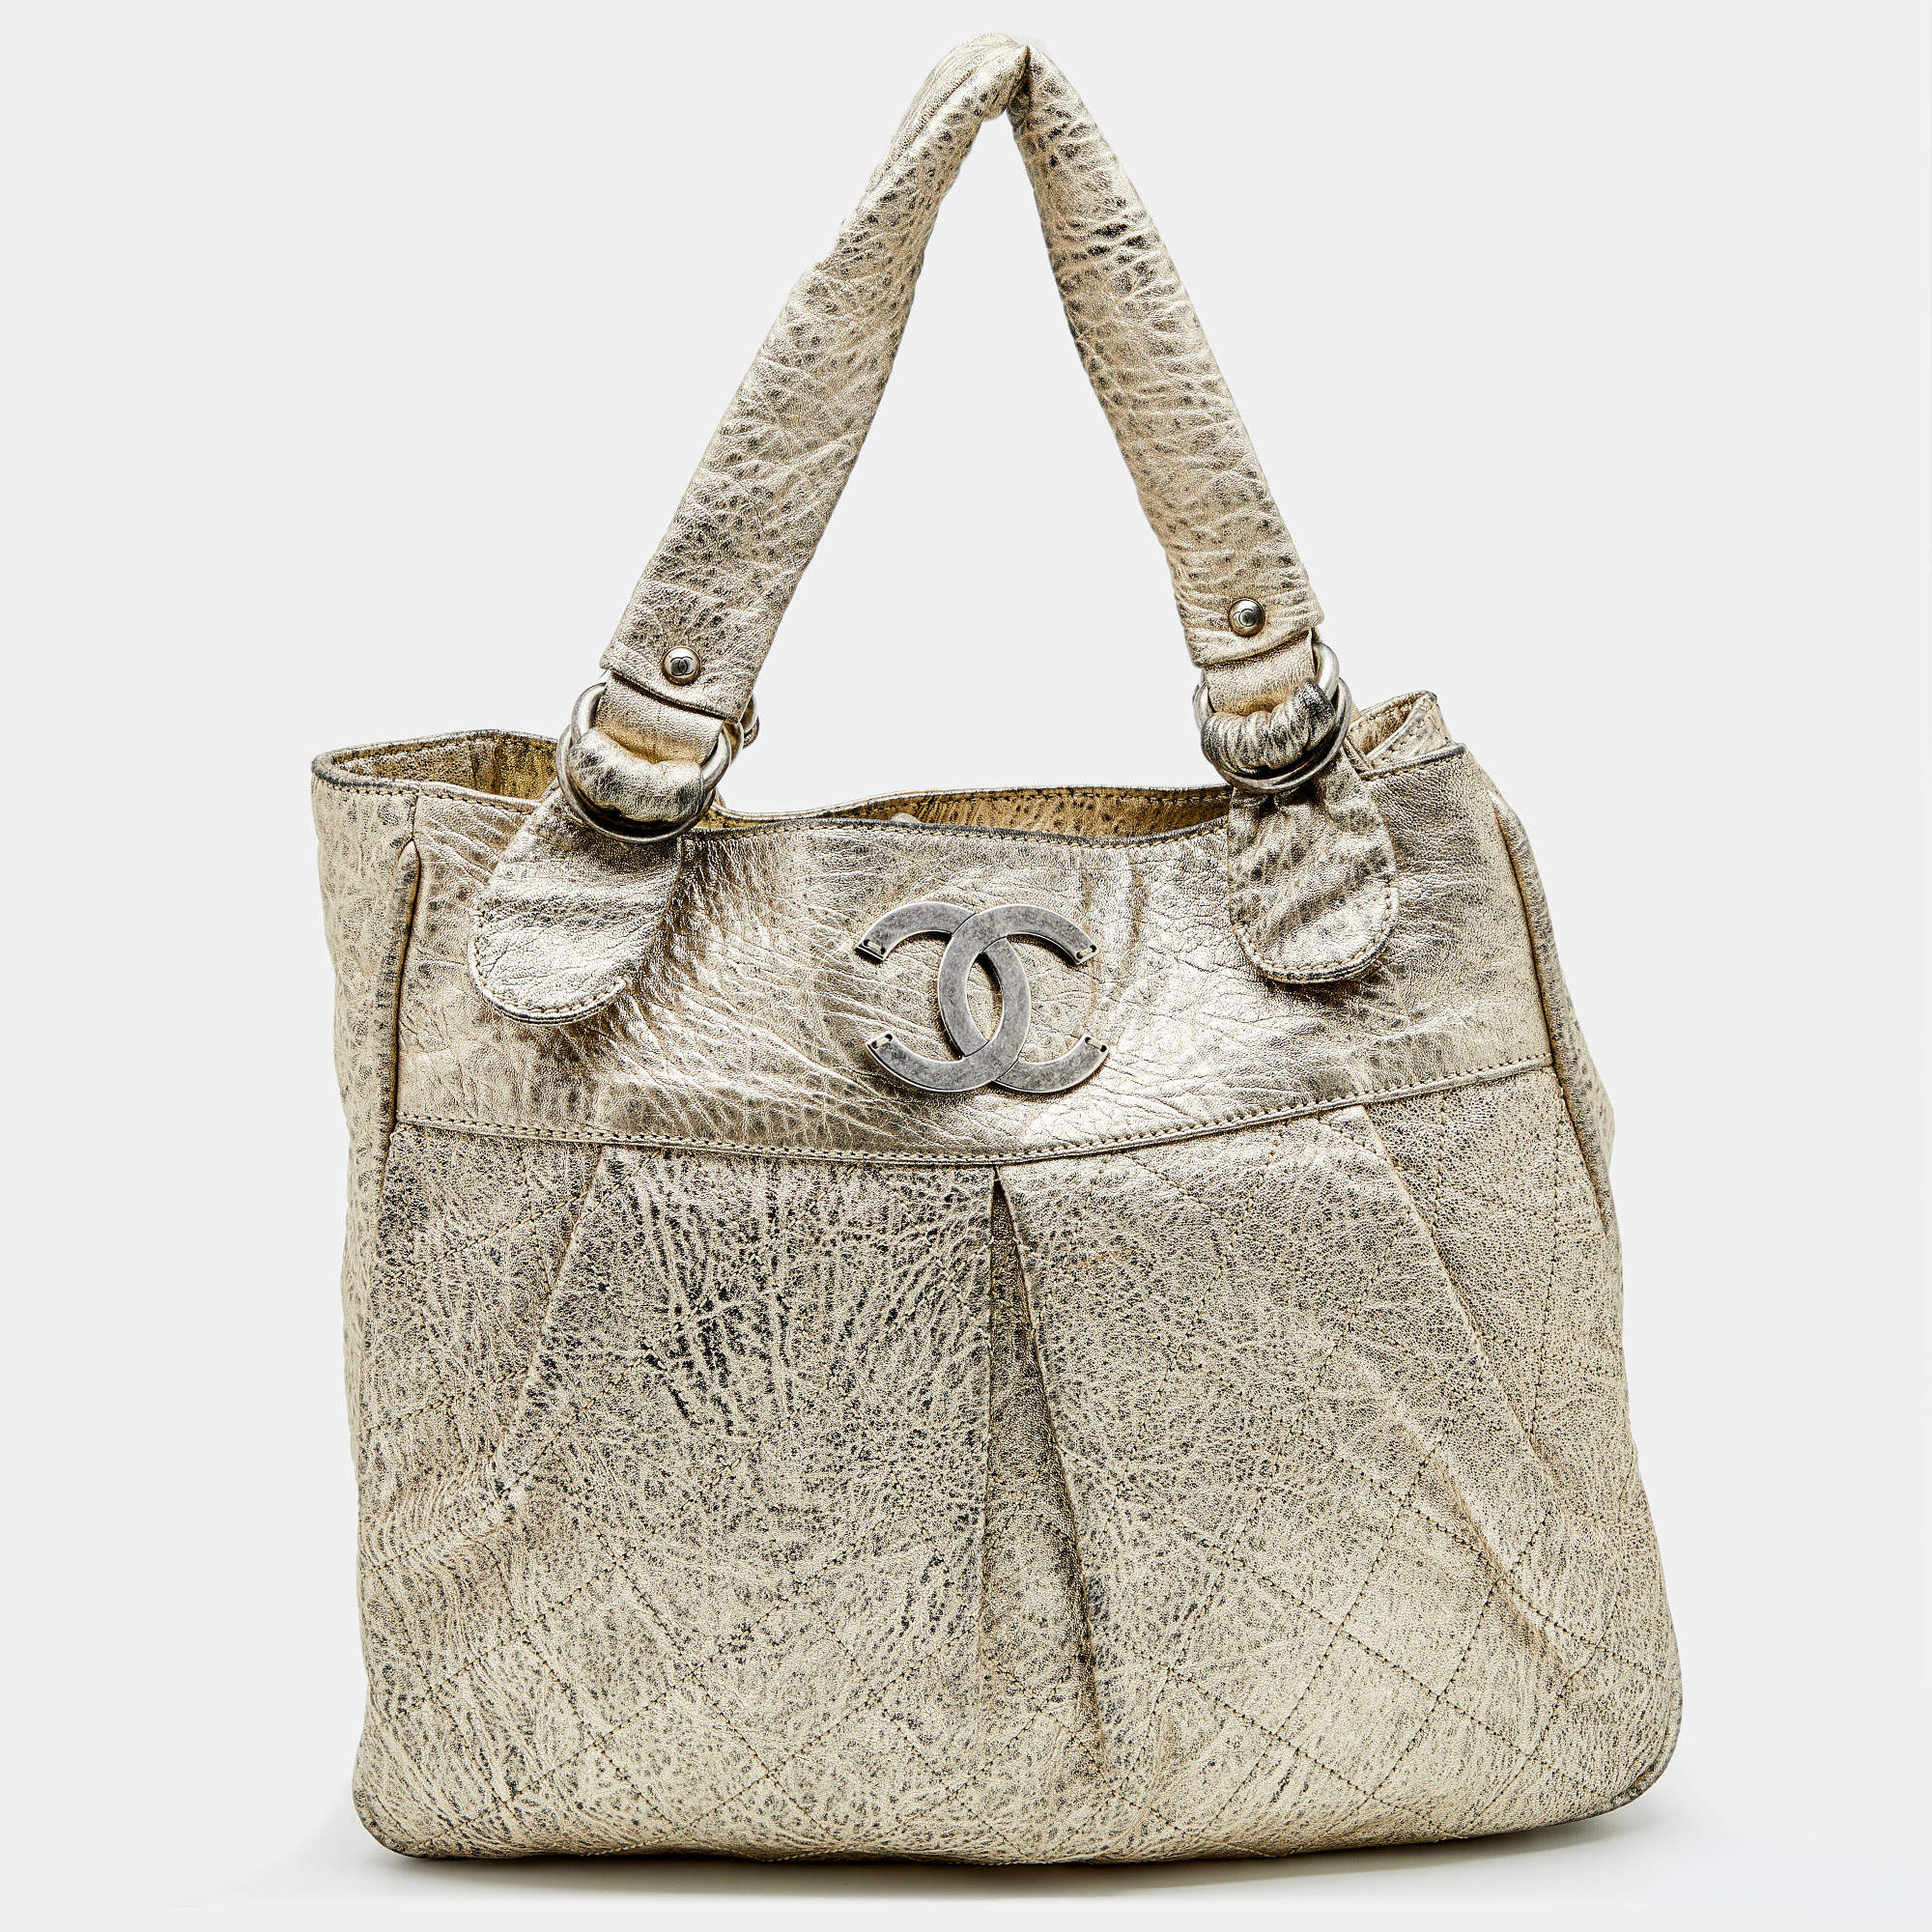 Chanel Metallic Gold Quilted Leather CC Le Marais Tote